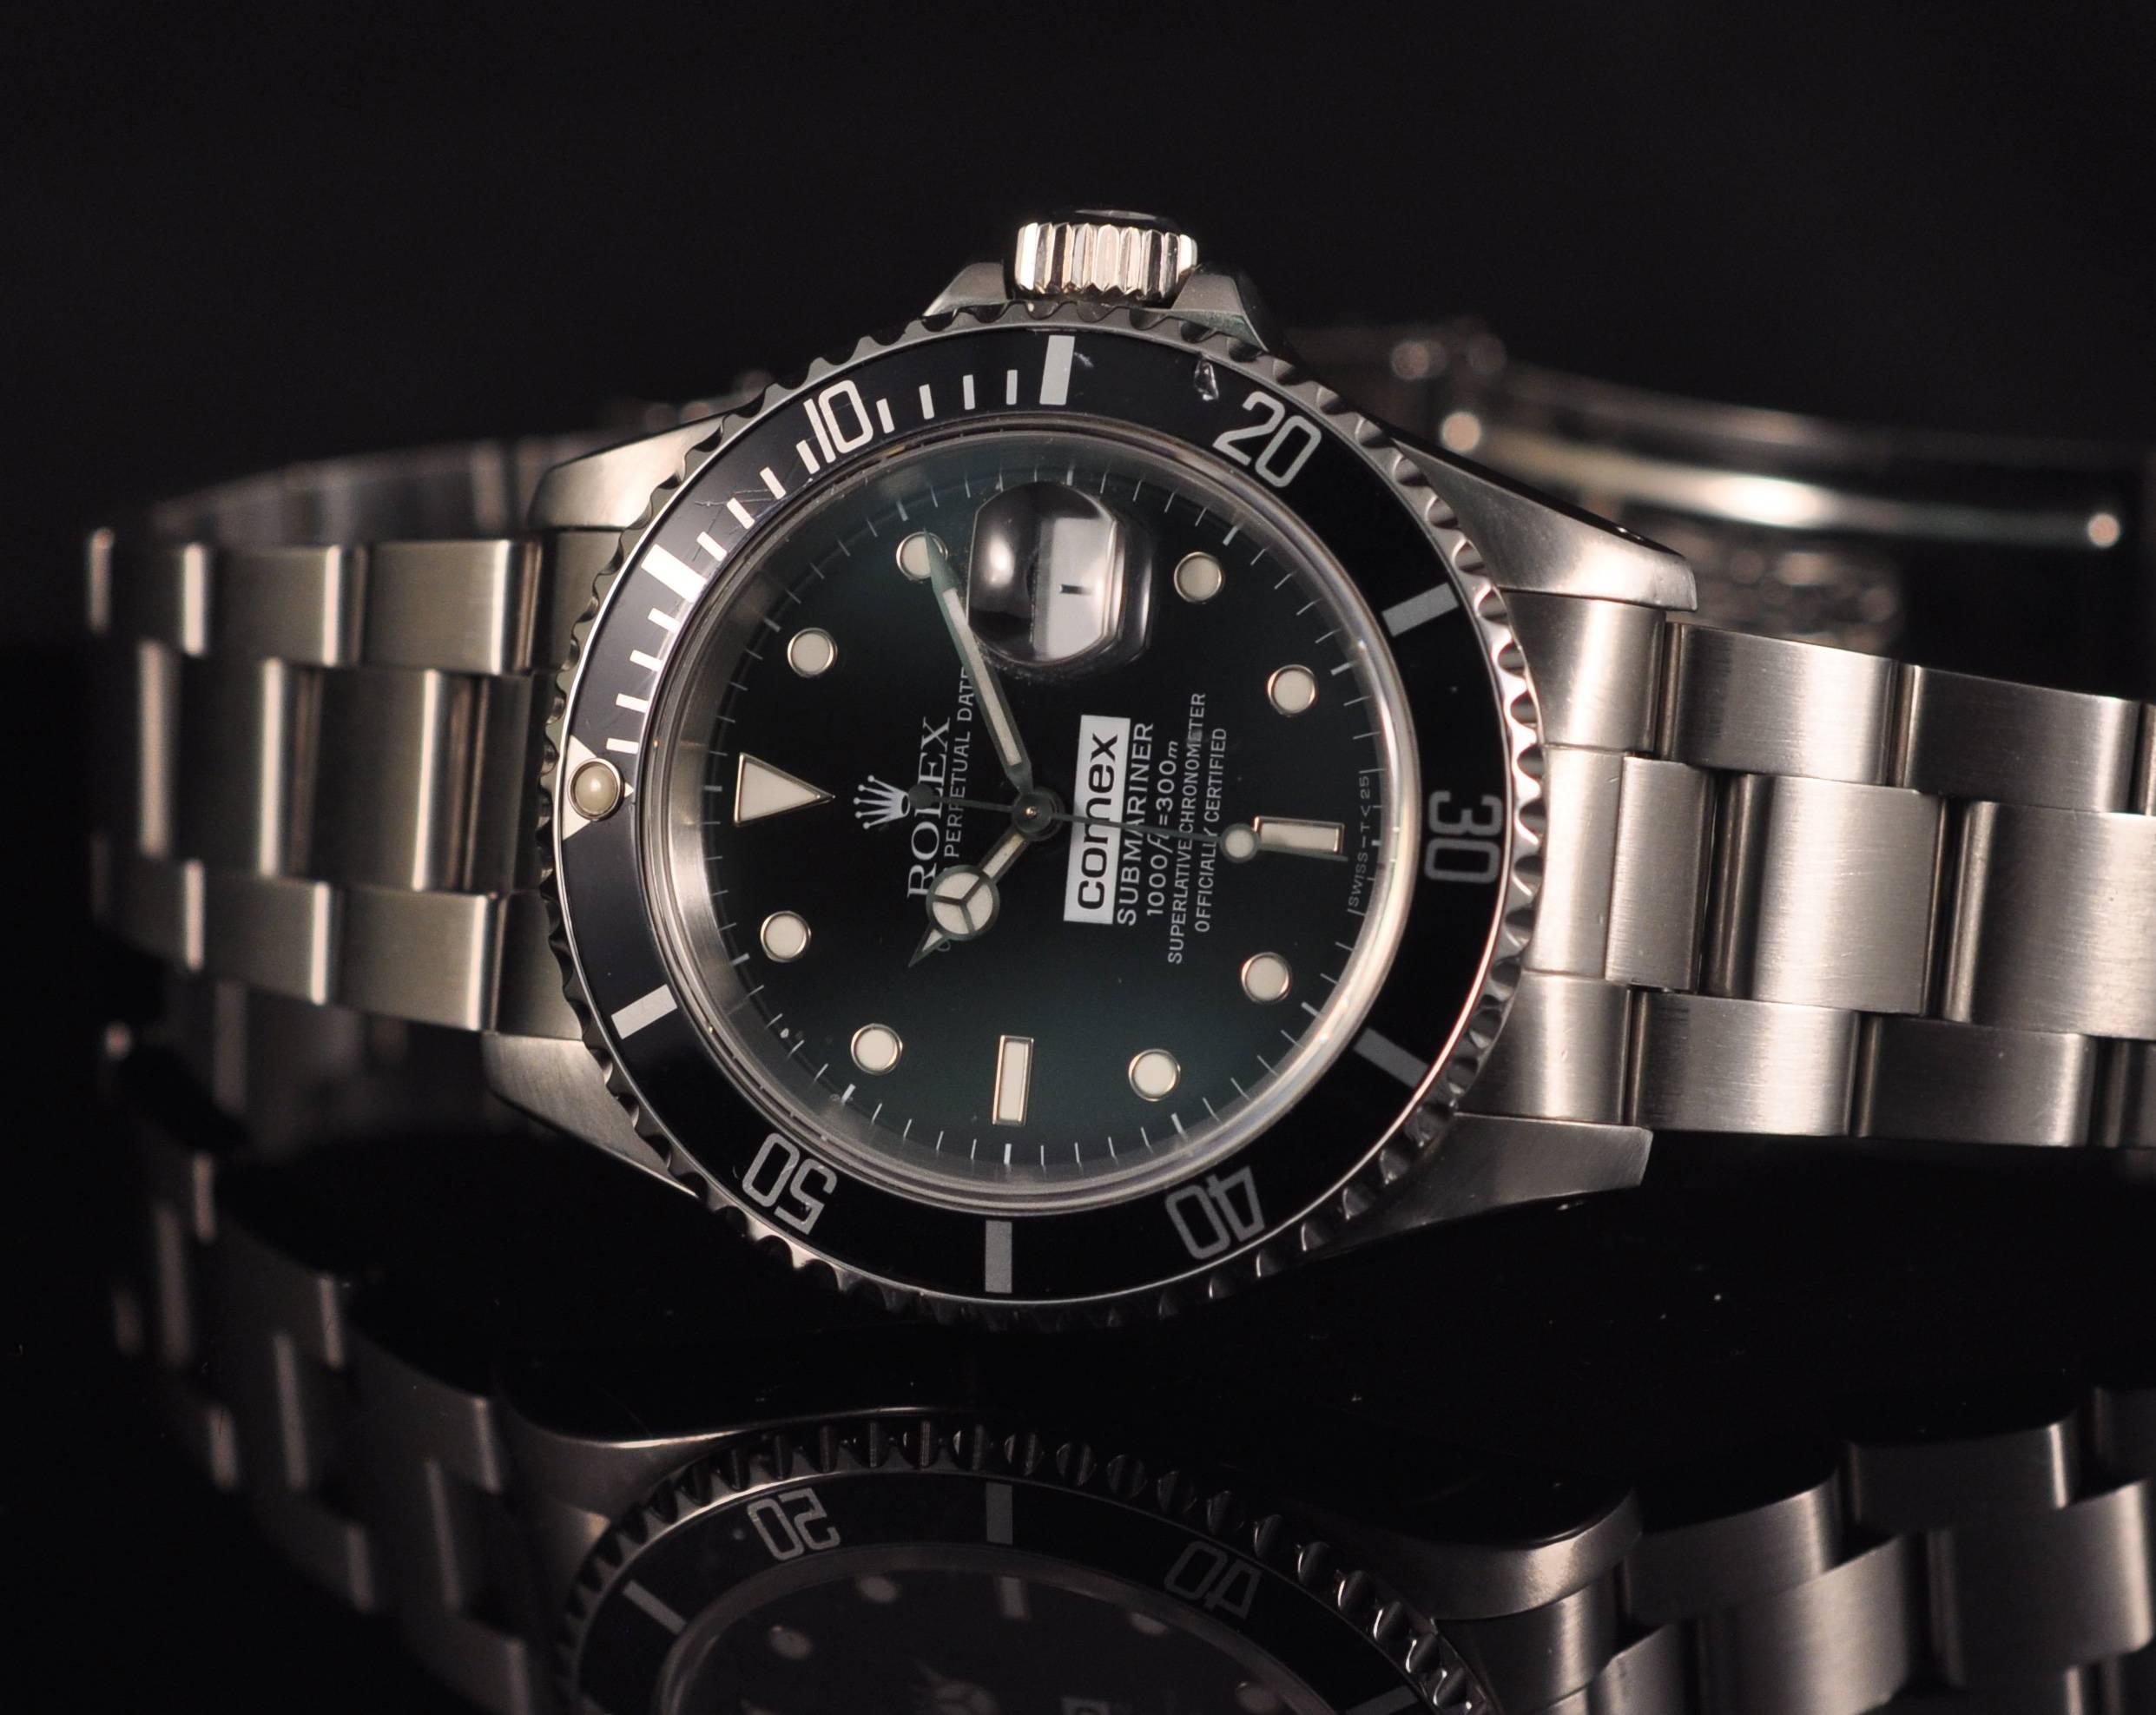 Rolex Stainless Steel Submariner Comex Diver's Wristwatch Ref 16610  In Excellent Condition For Sale In Paris, FR